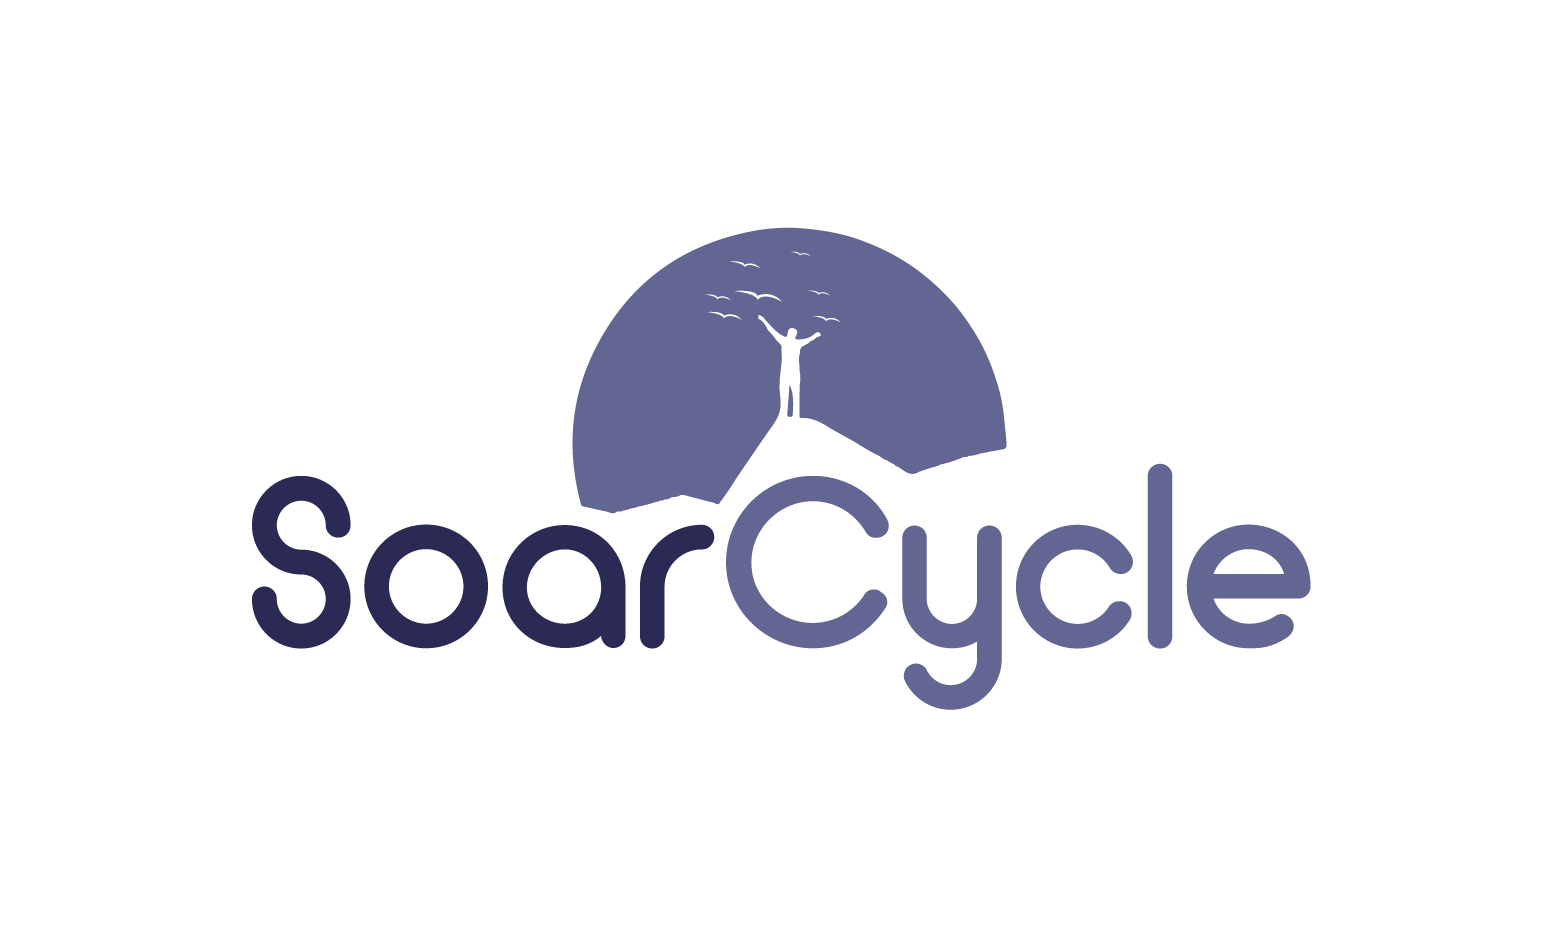 SoarCycle.com - Creative brandable domain for sale